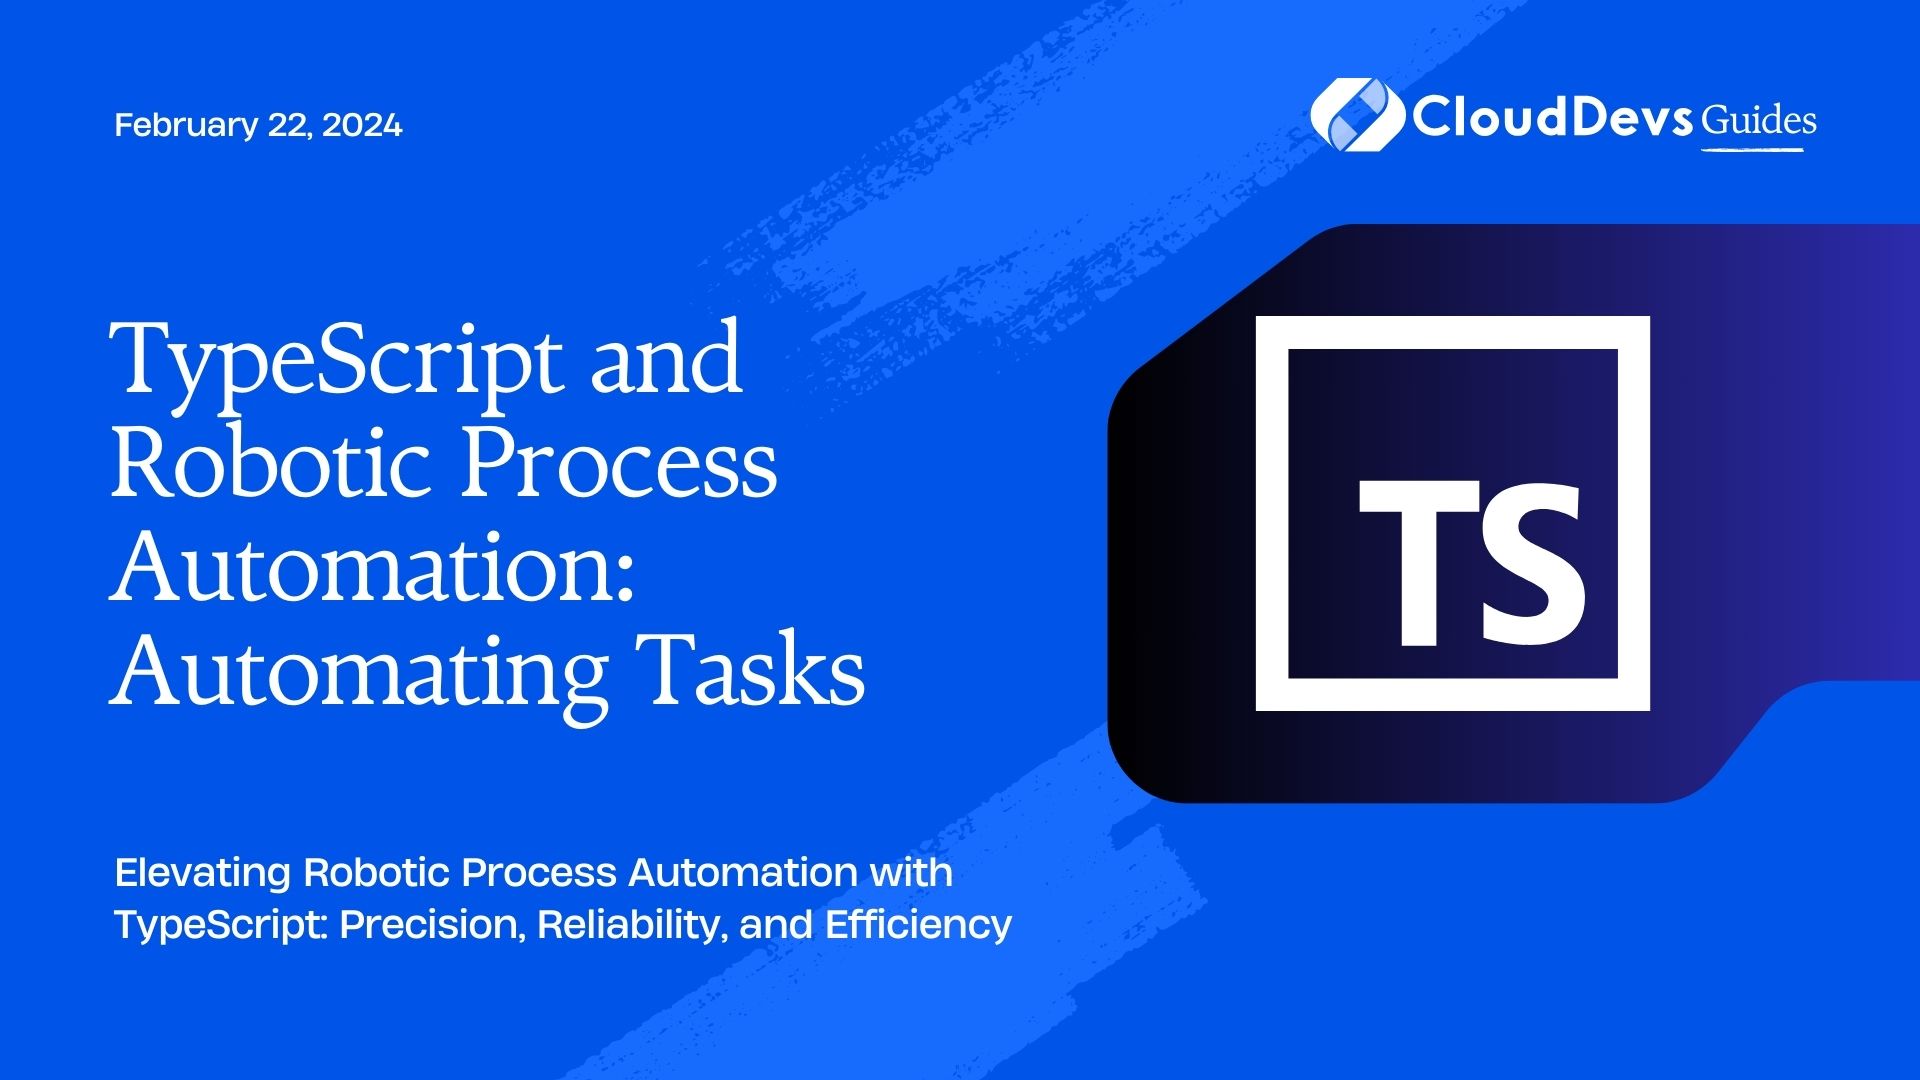 TypeScript and Robotic Process Automation: Automating Tasks